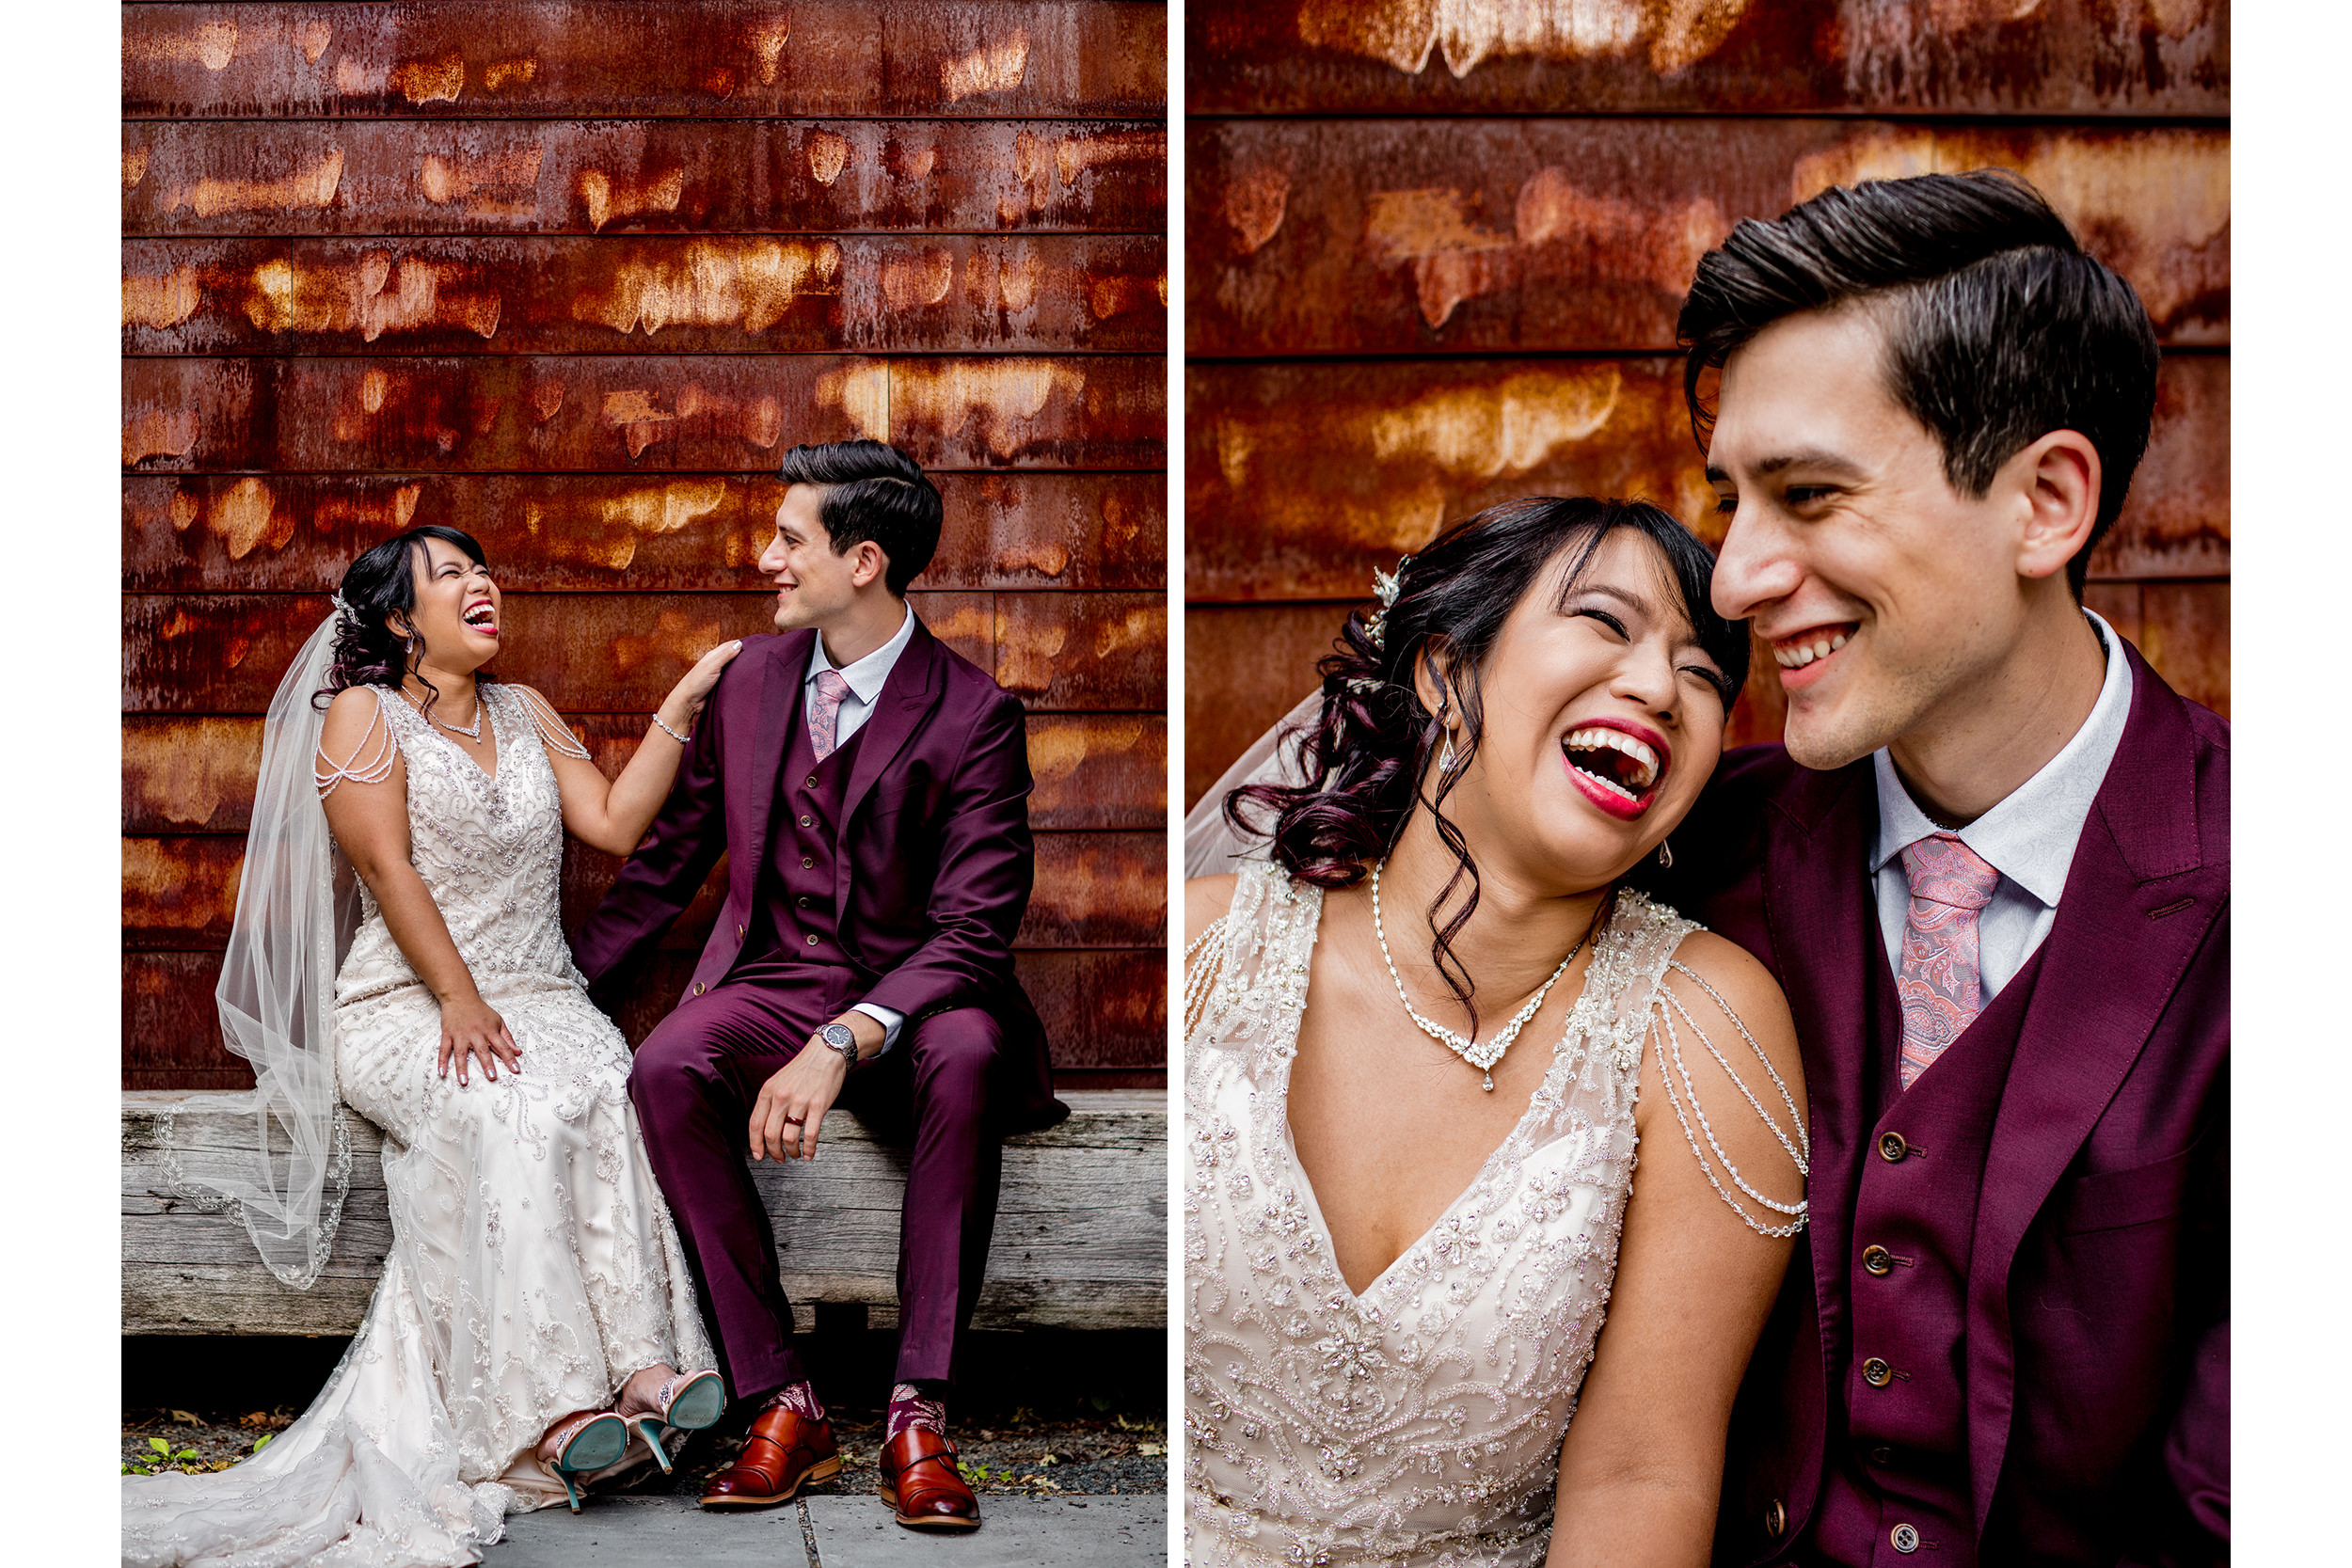 A couple laughs together during their wedding at the Joinery.